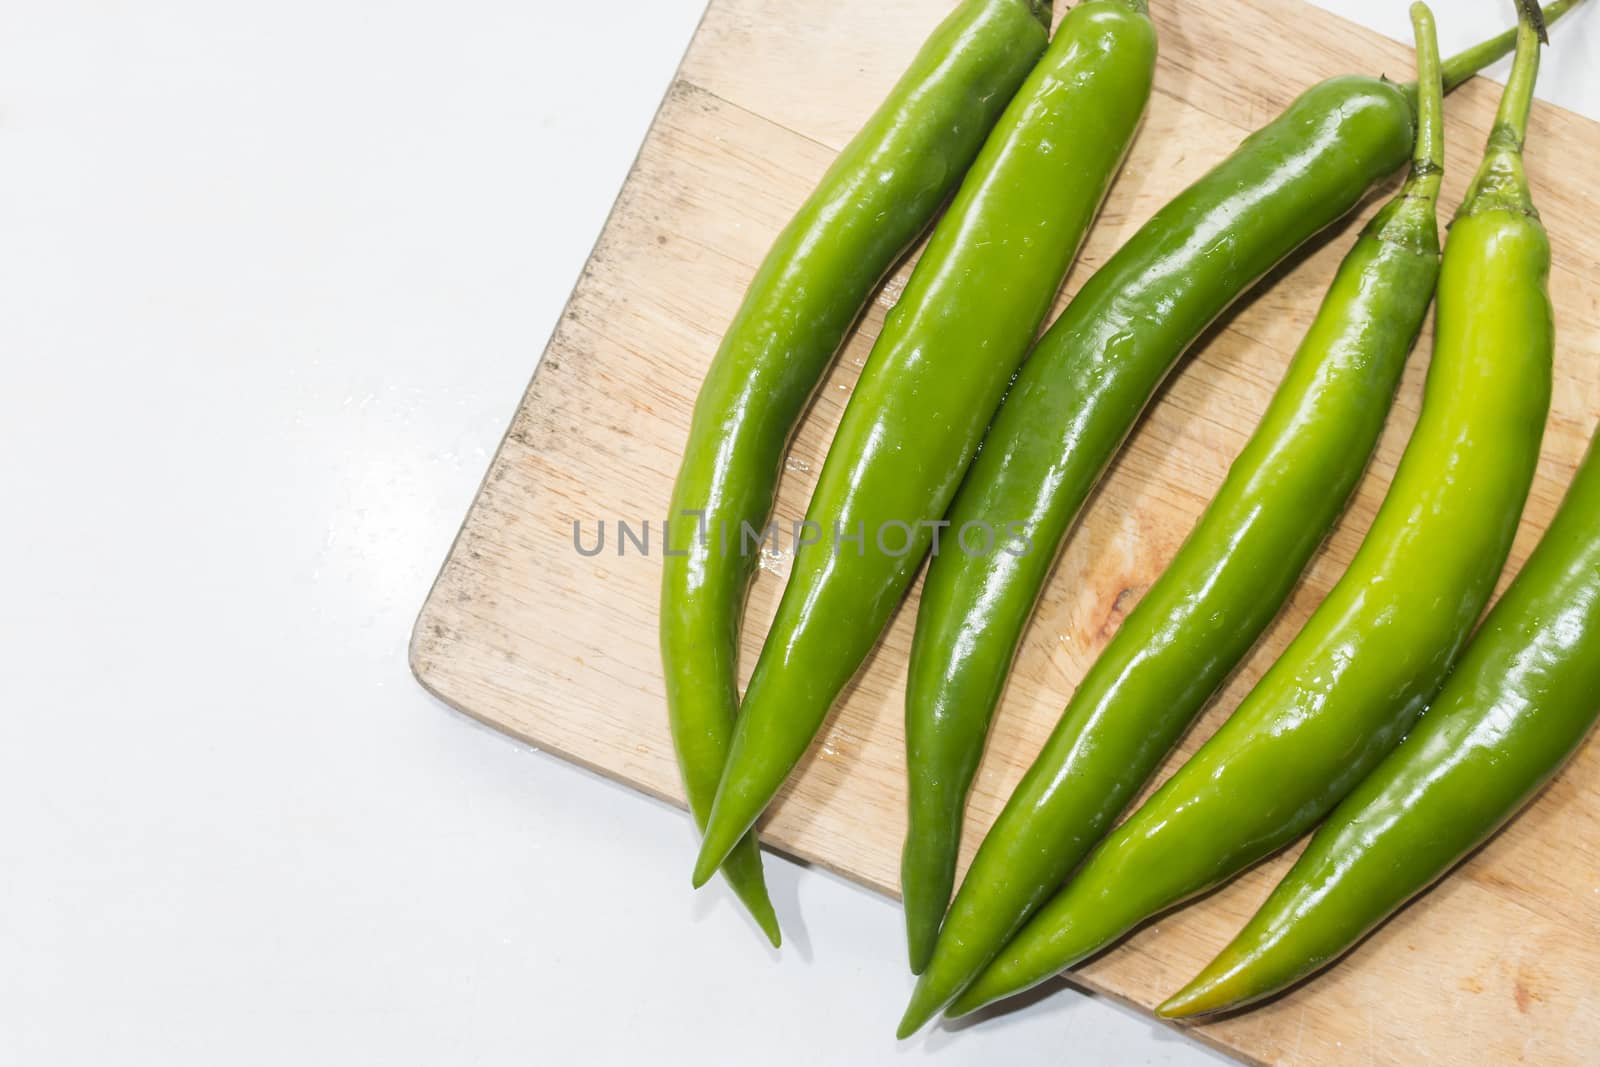  green chilies by Gobba17